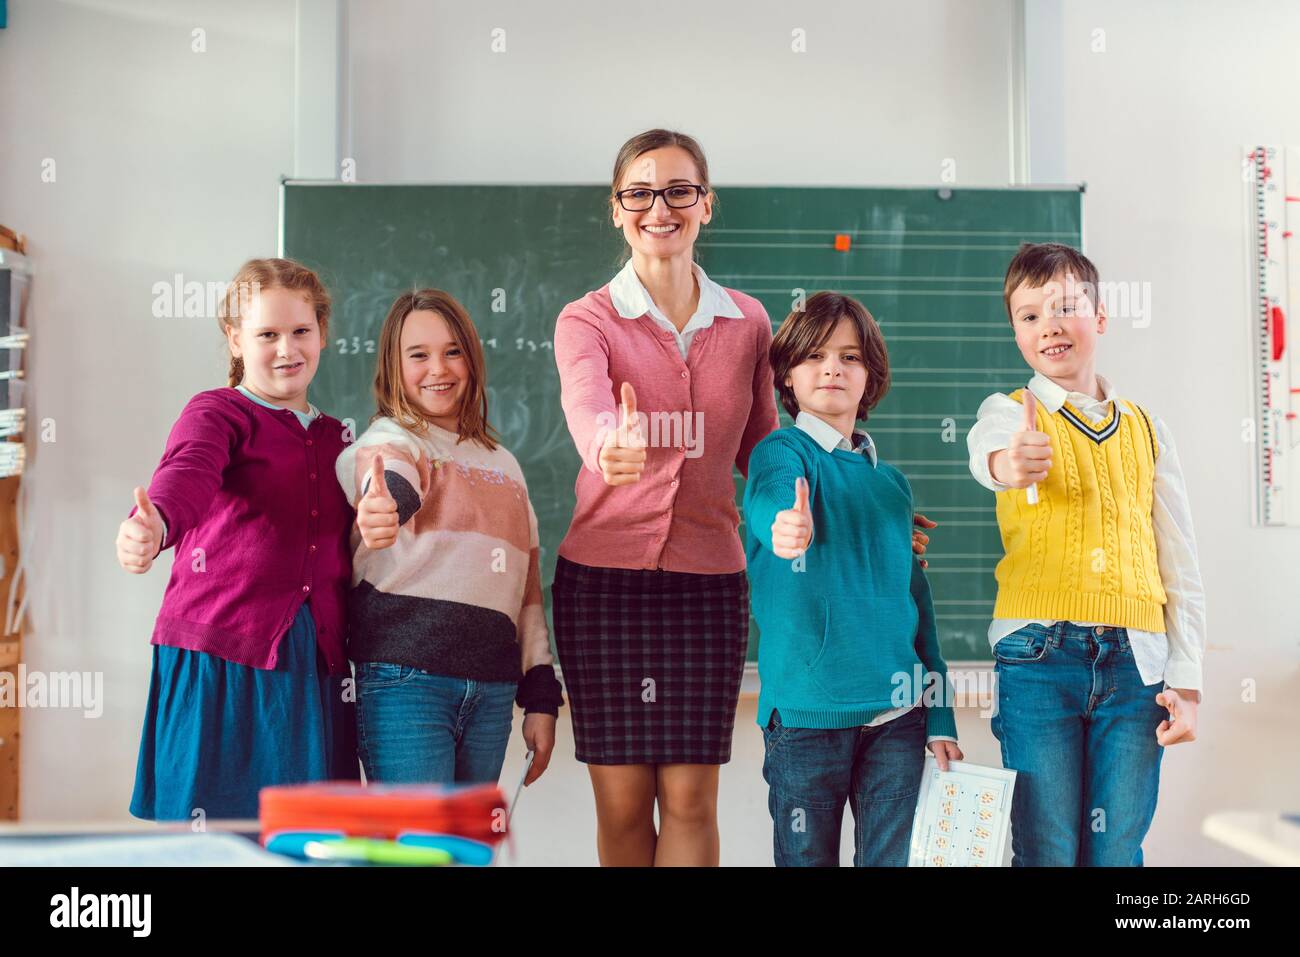 Thumbs up given by pupils and teacher because school is great Stock Photo